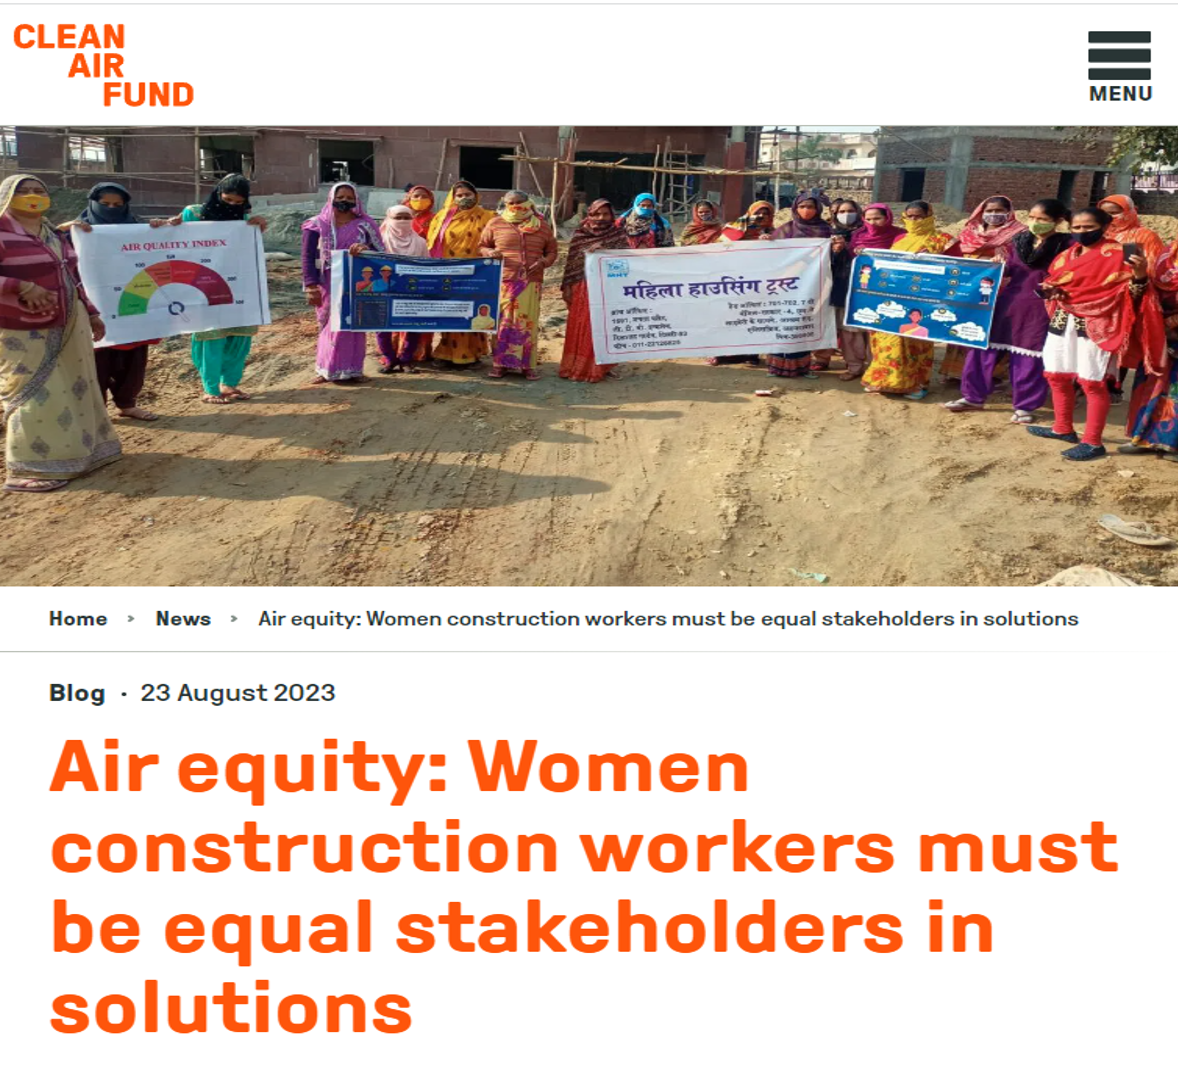 Air equity: Women construction workers must be equal stakeholders in solutions